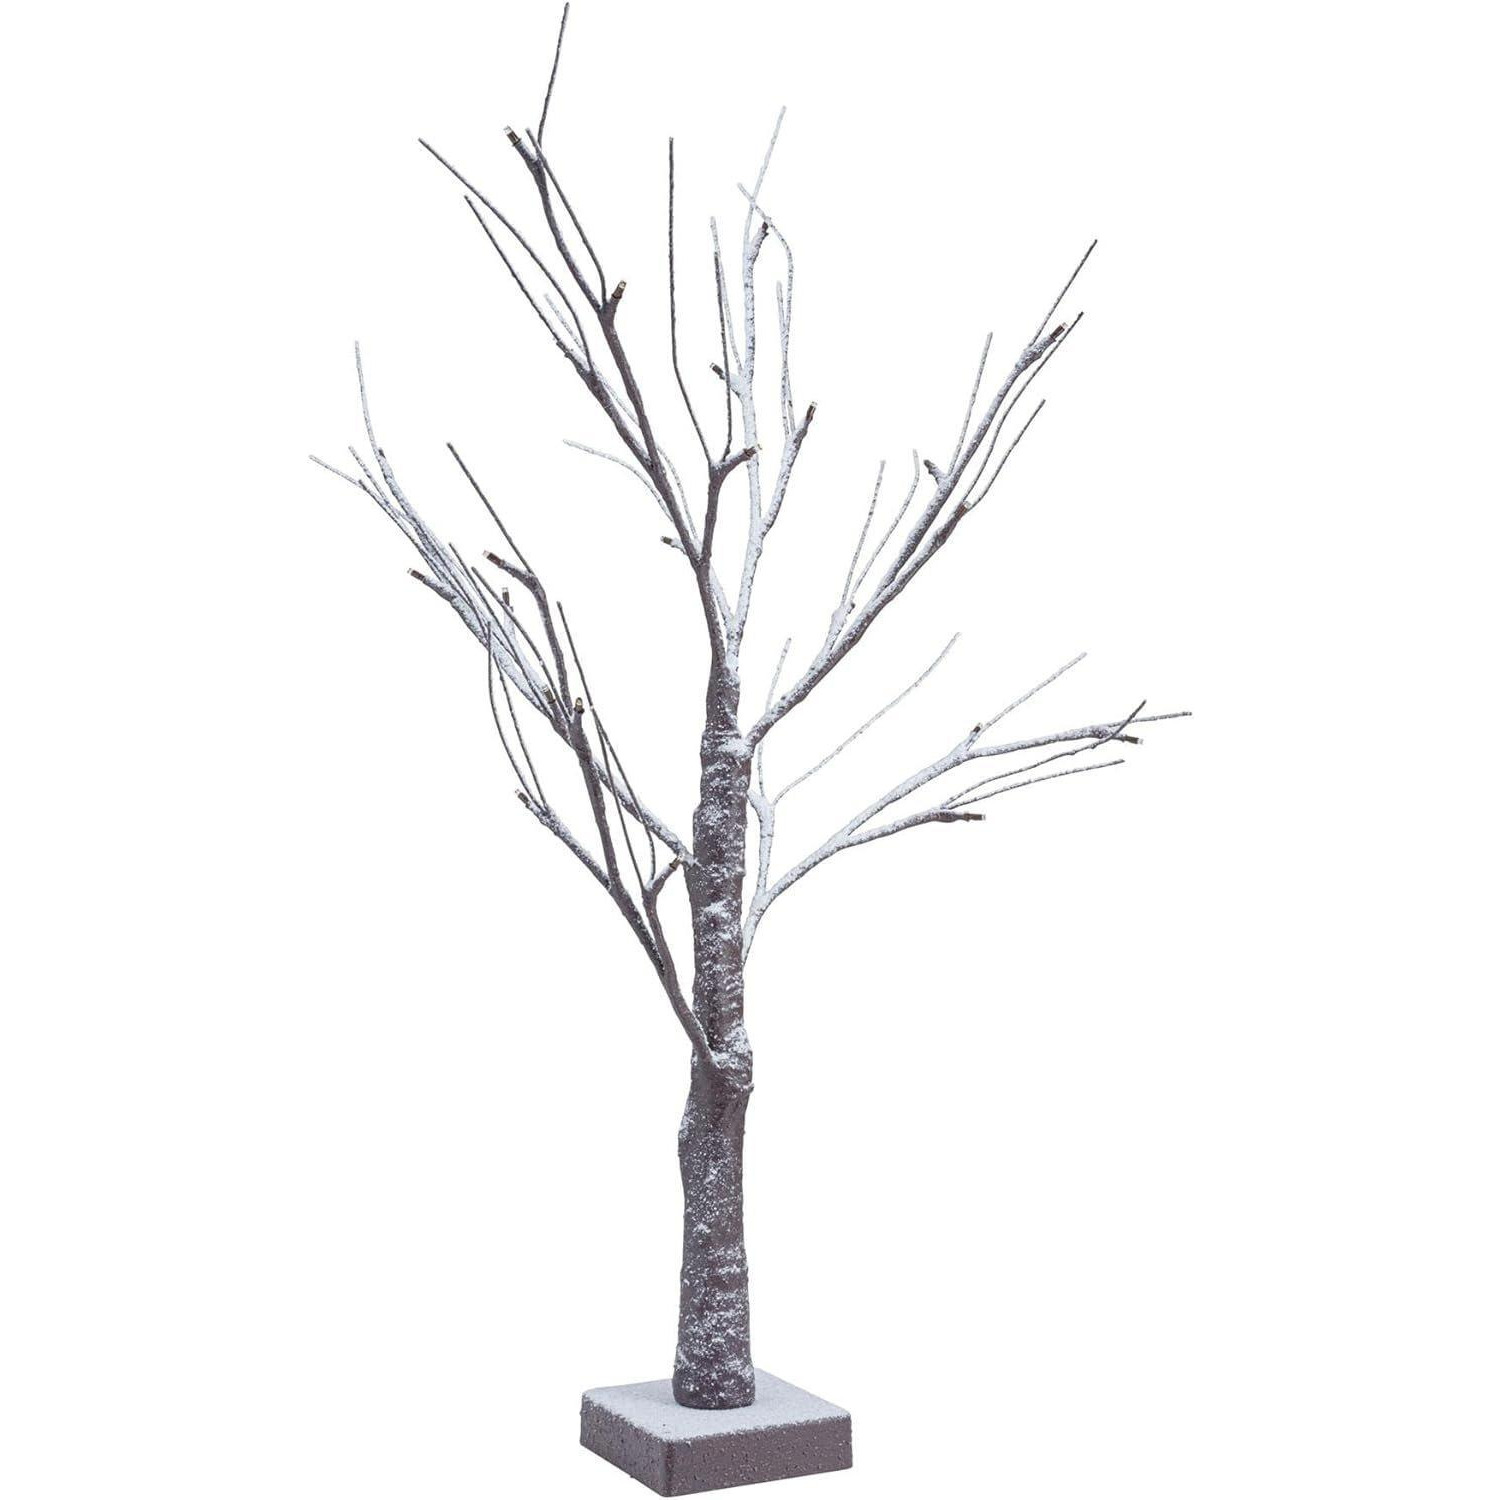 Snowy Effect Brown Birch Christmas Twig Tree with Warm White LEDs - image 1